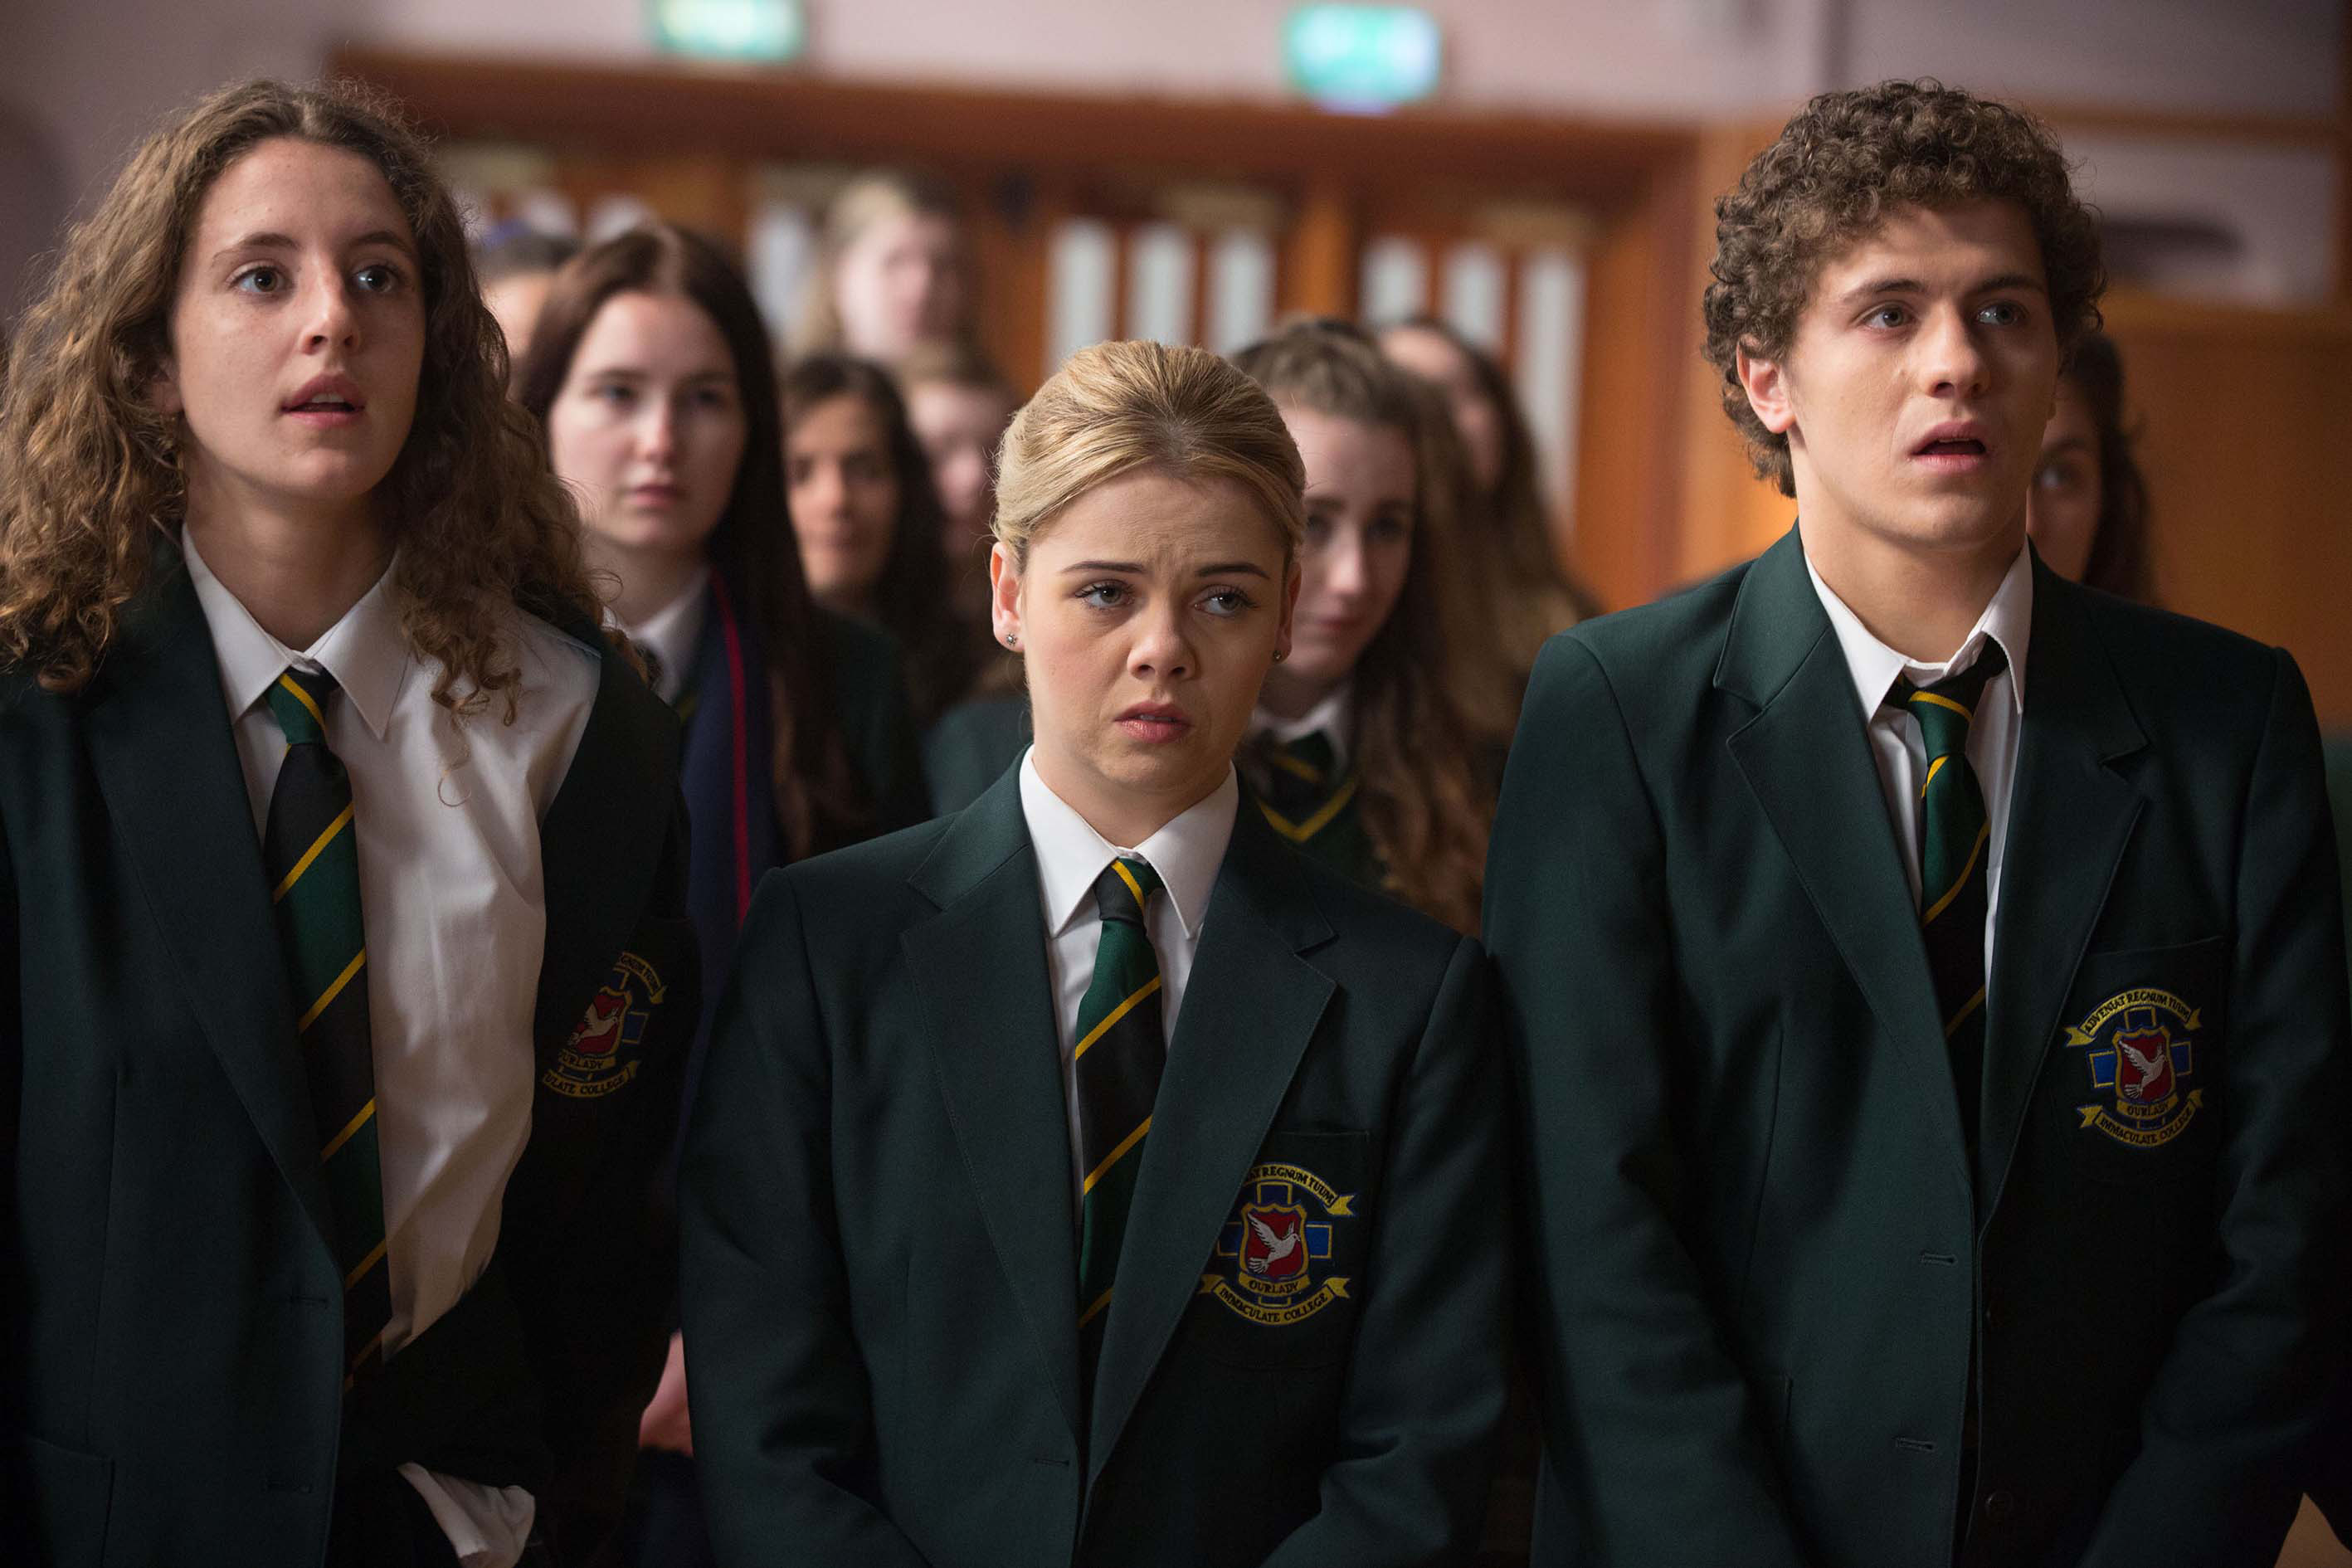 Louisa Harland, Saoirse Jackson, and Dylan Llewellyn looking confused.